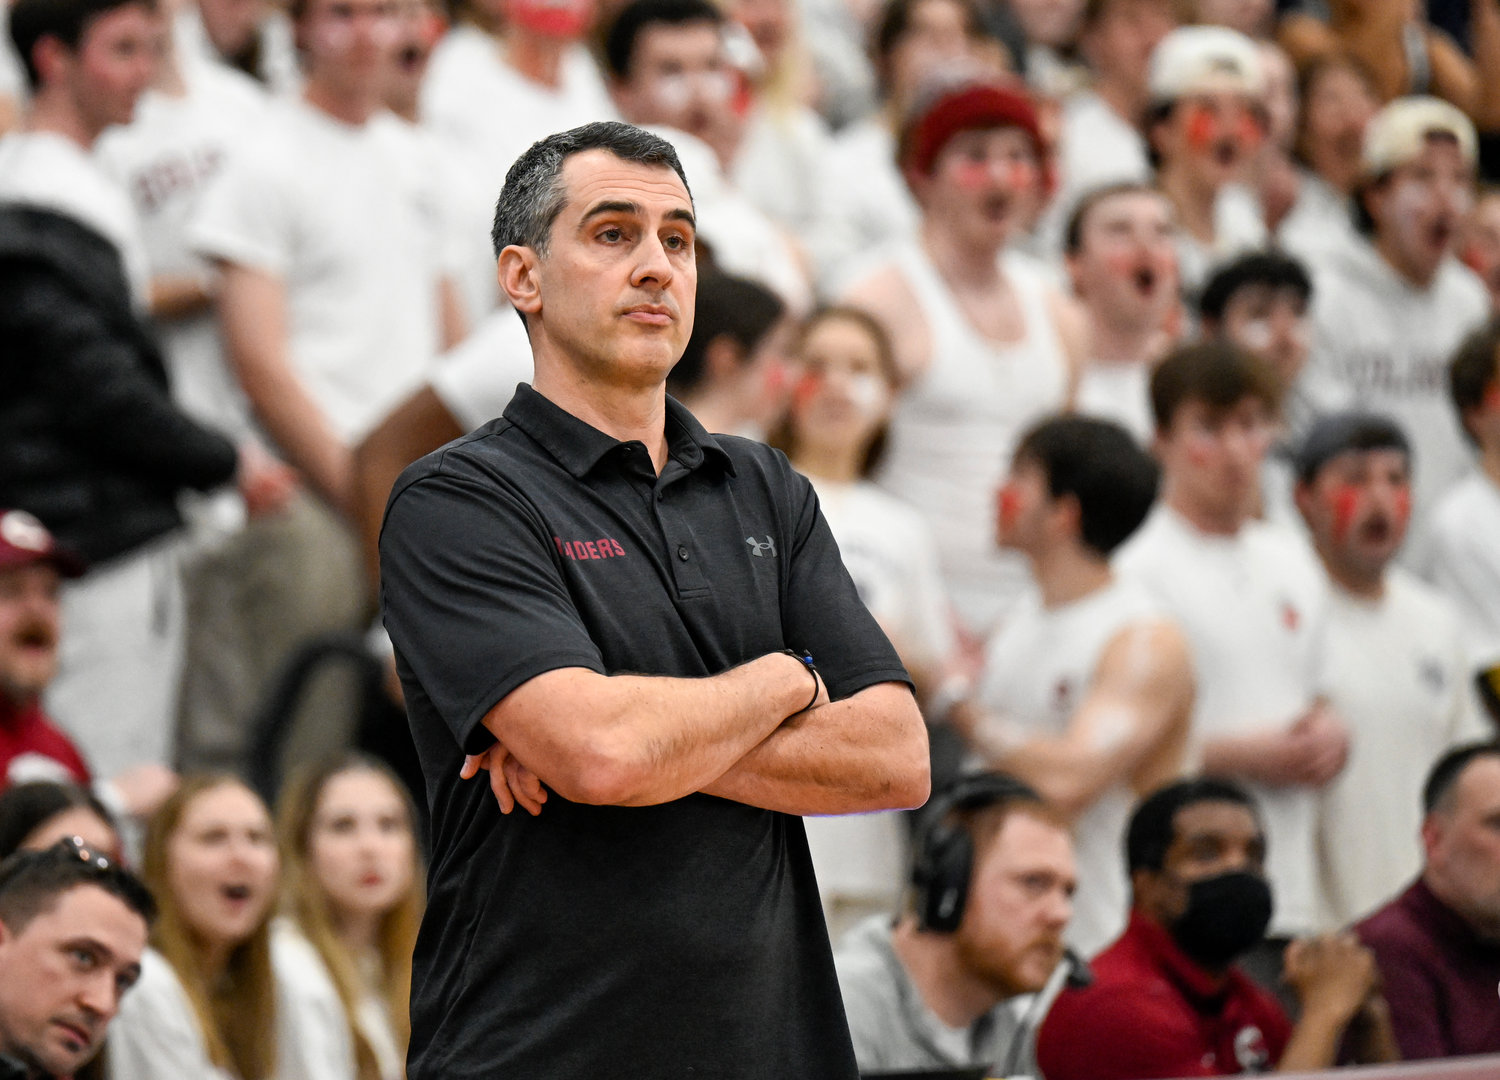 WATCHING CLOSELY — Colgate coach Matt Langel watches during the first half of the team's  game against Navy for the Patriot League men's tournament championship on March 9 in Hamilton. Colgate won 74-58.